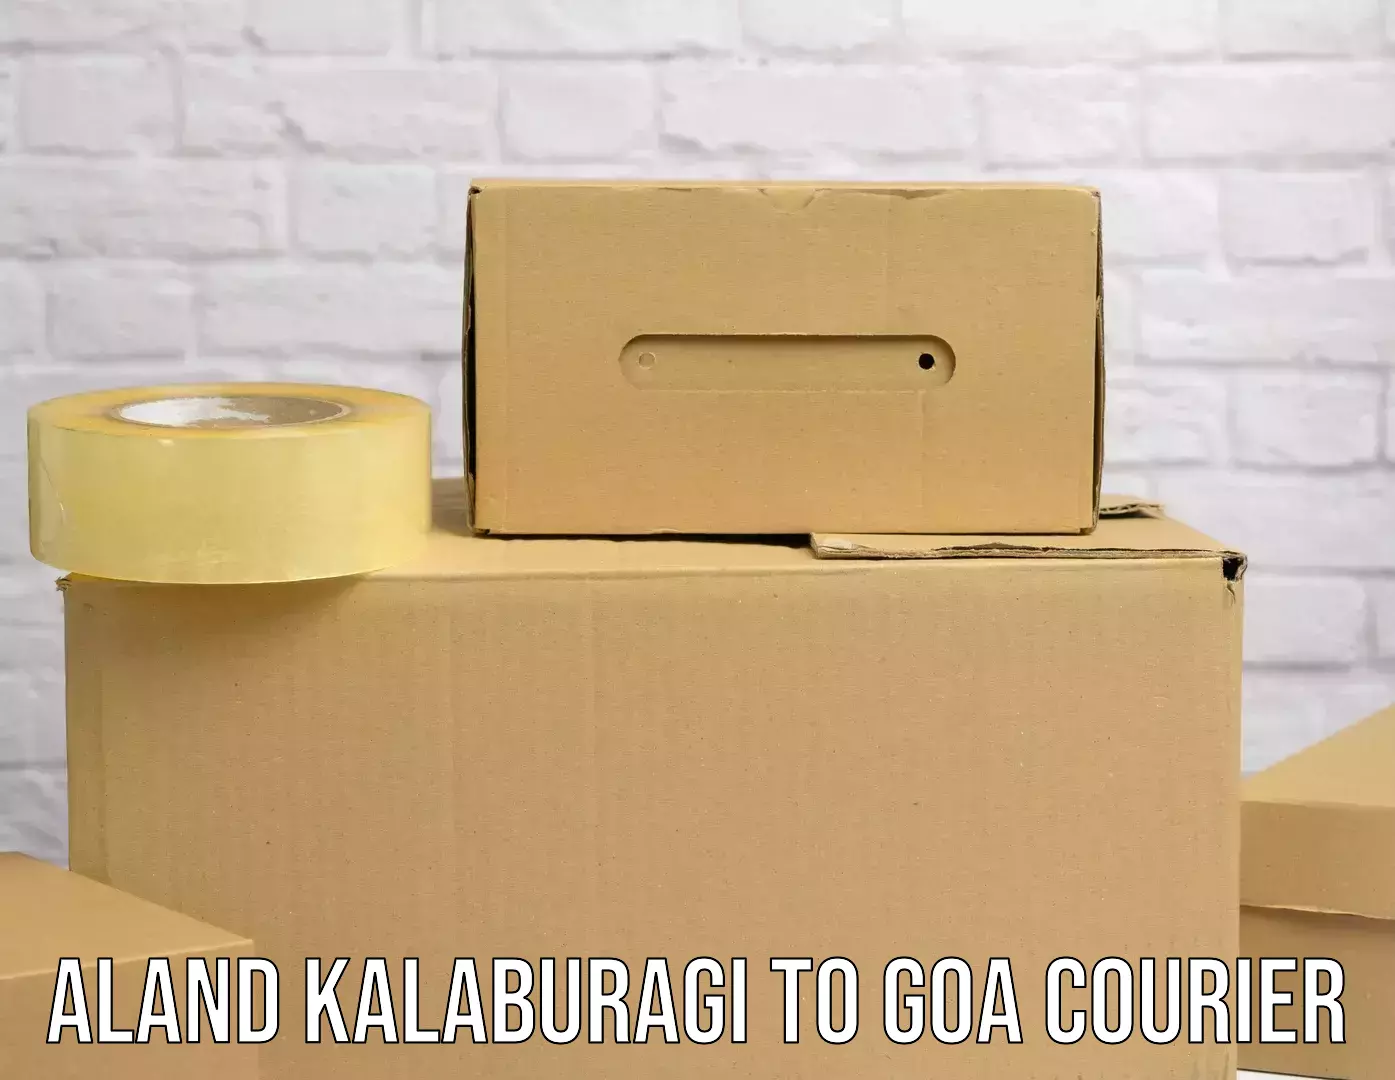 Scheduled delivery in Aland Kalaburagi to South Goa